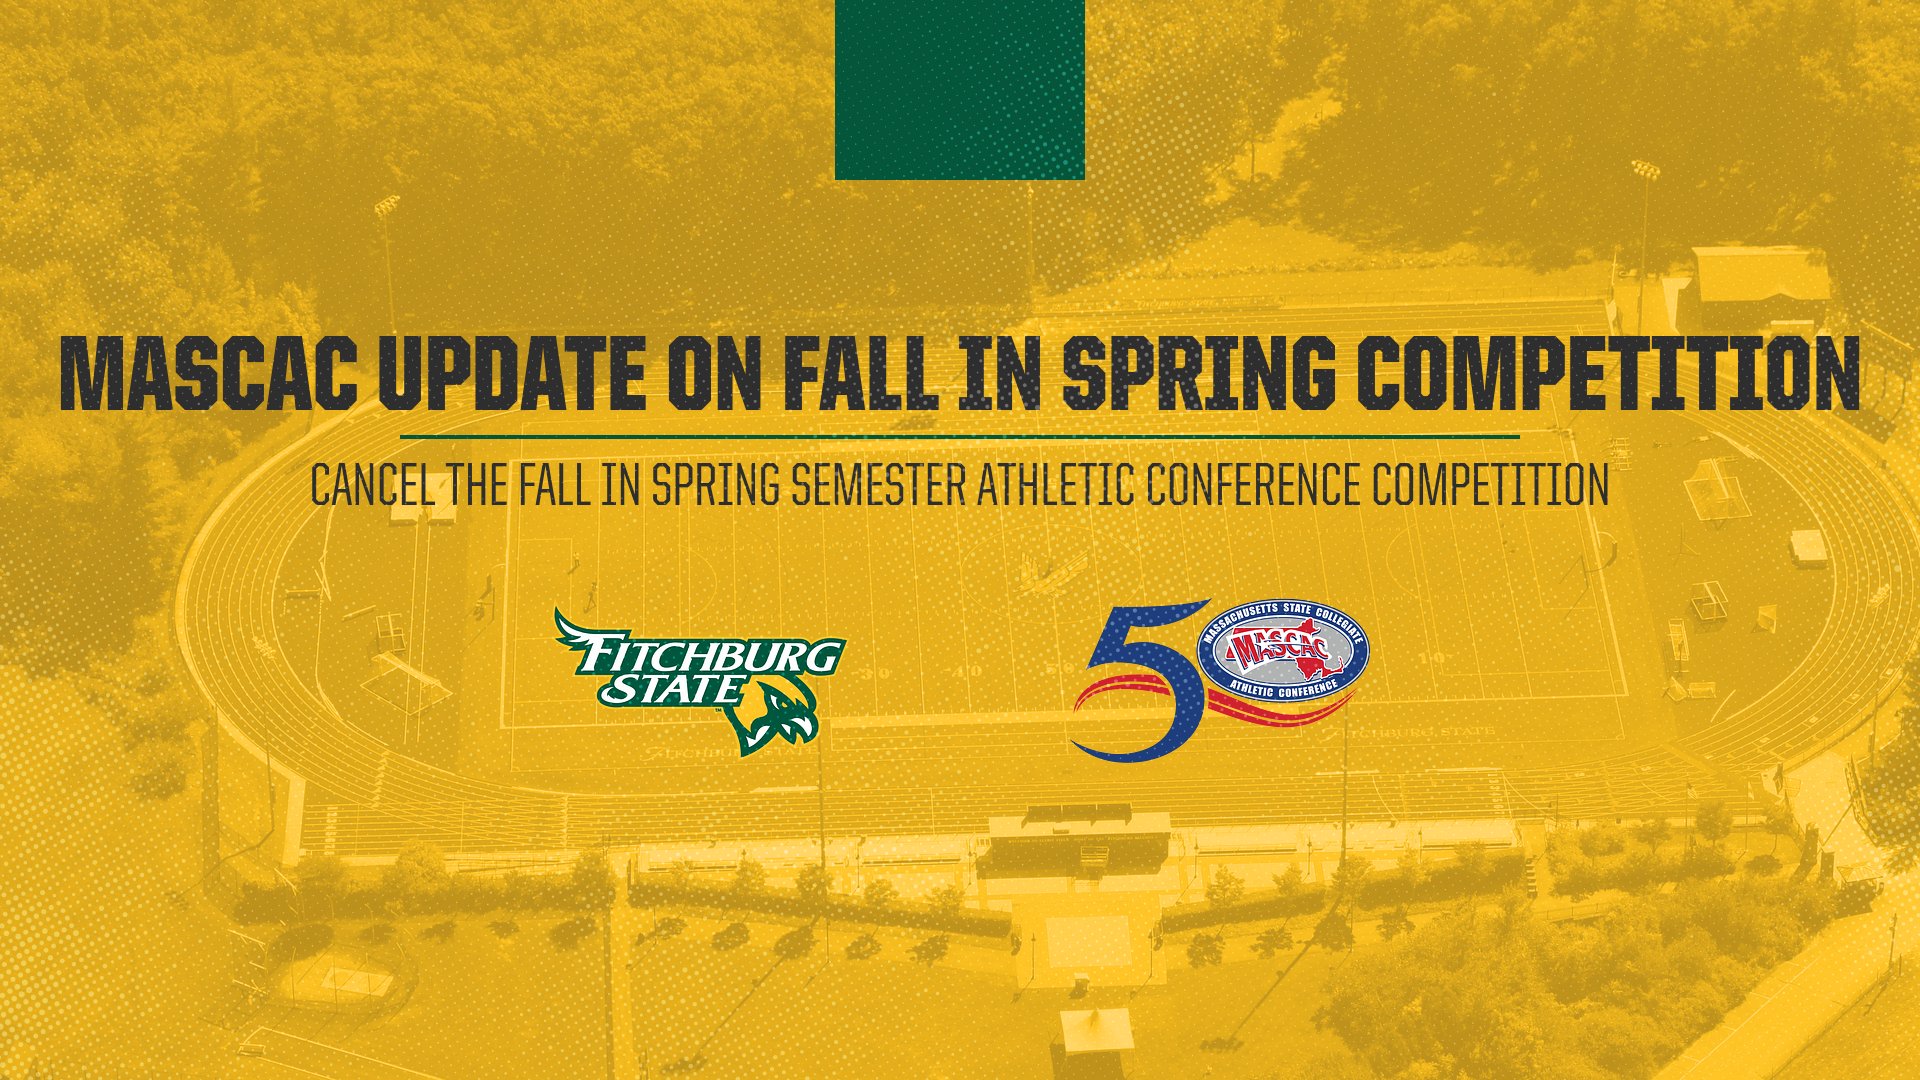 MASCAC Update on Fall in Spring Competition